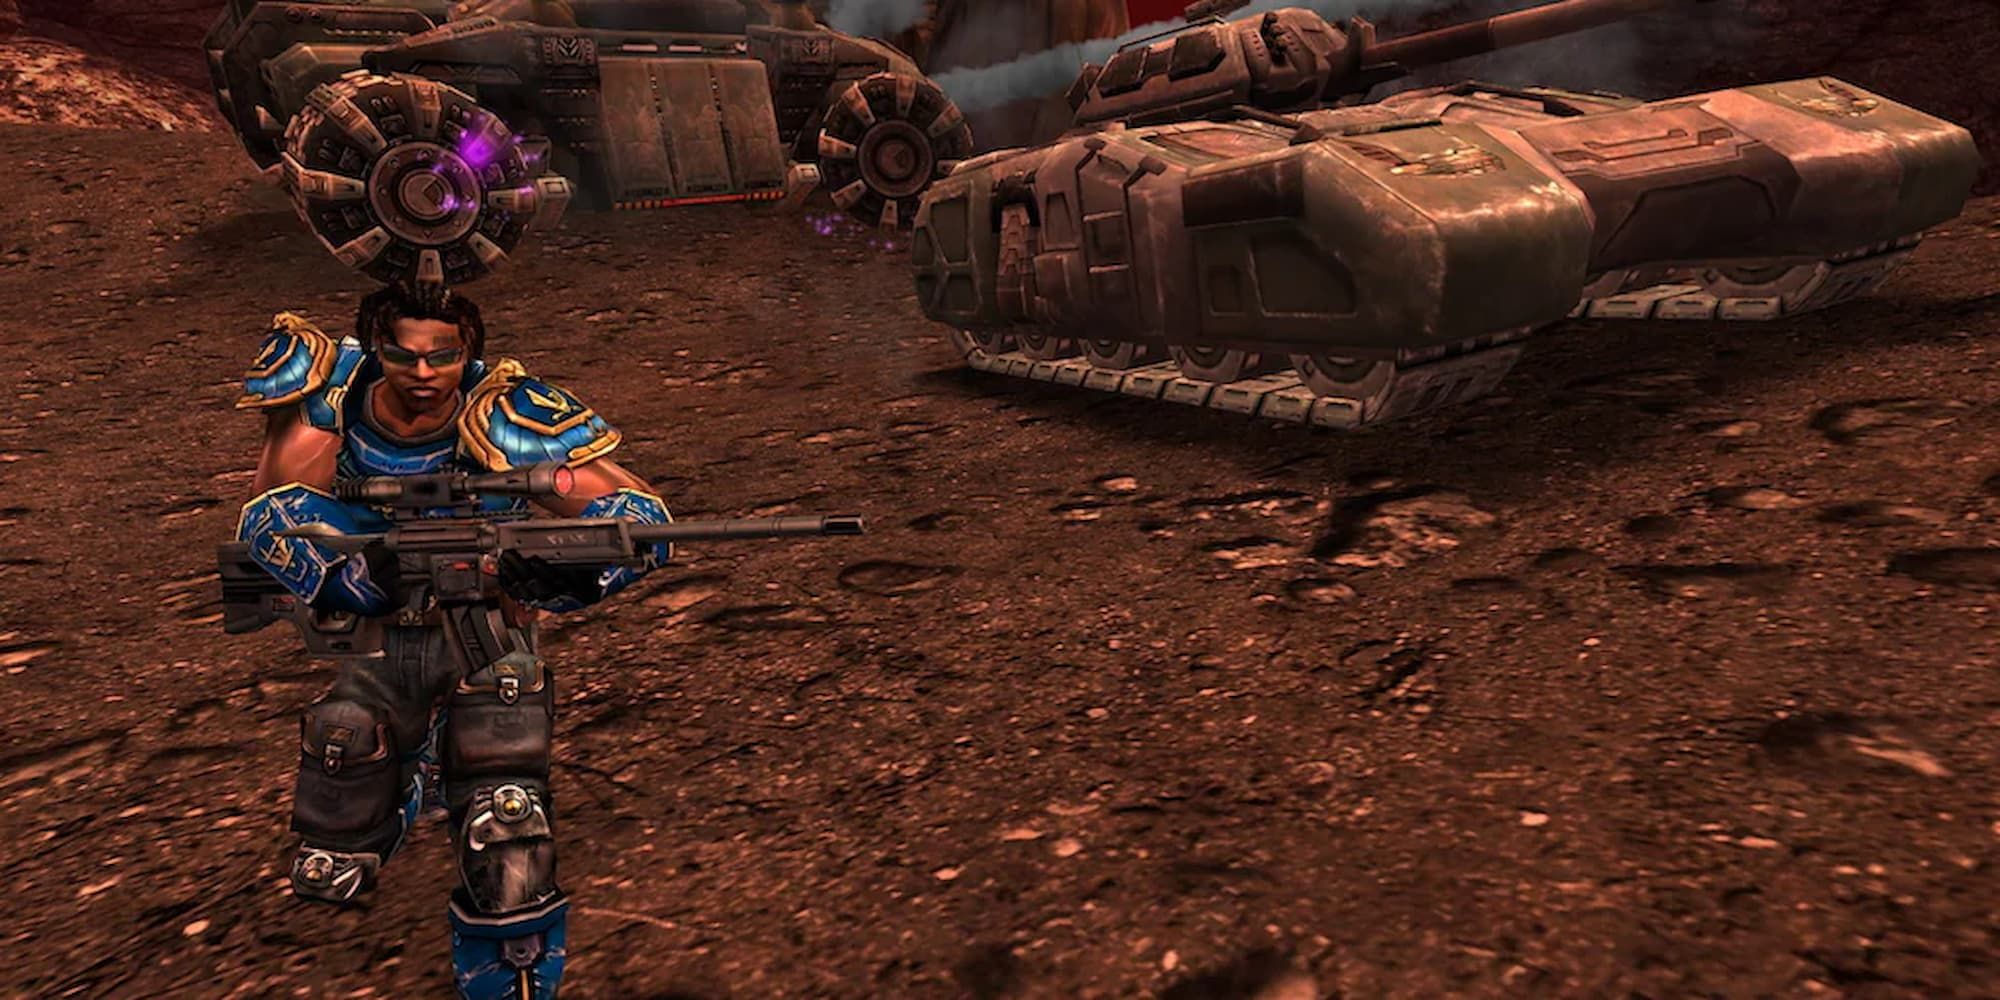 A soldier rushes into battle with two tanks behind him in Unreal Tournament 2004.